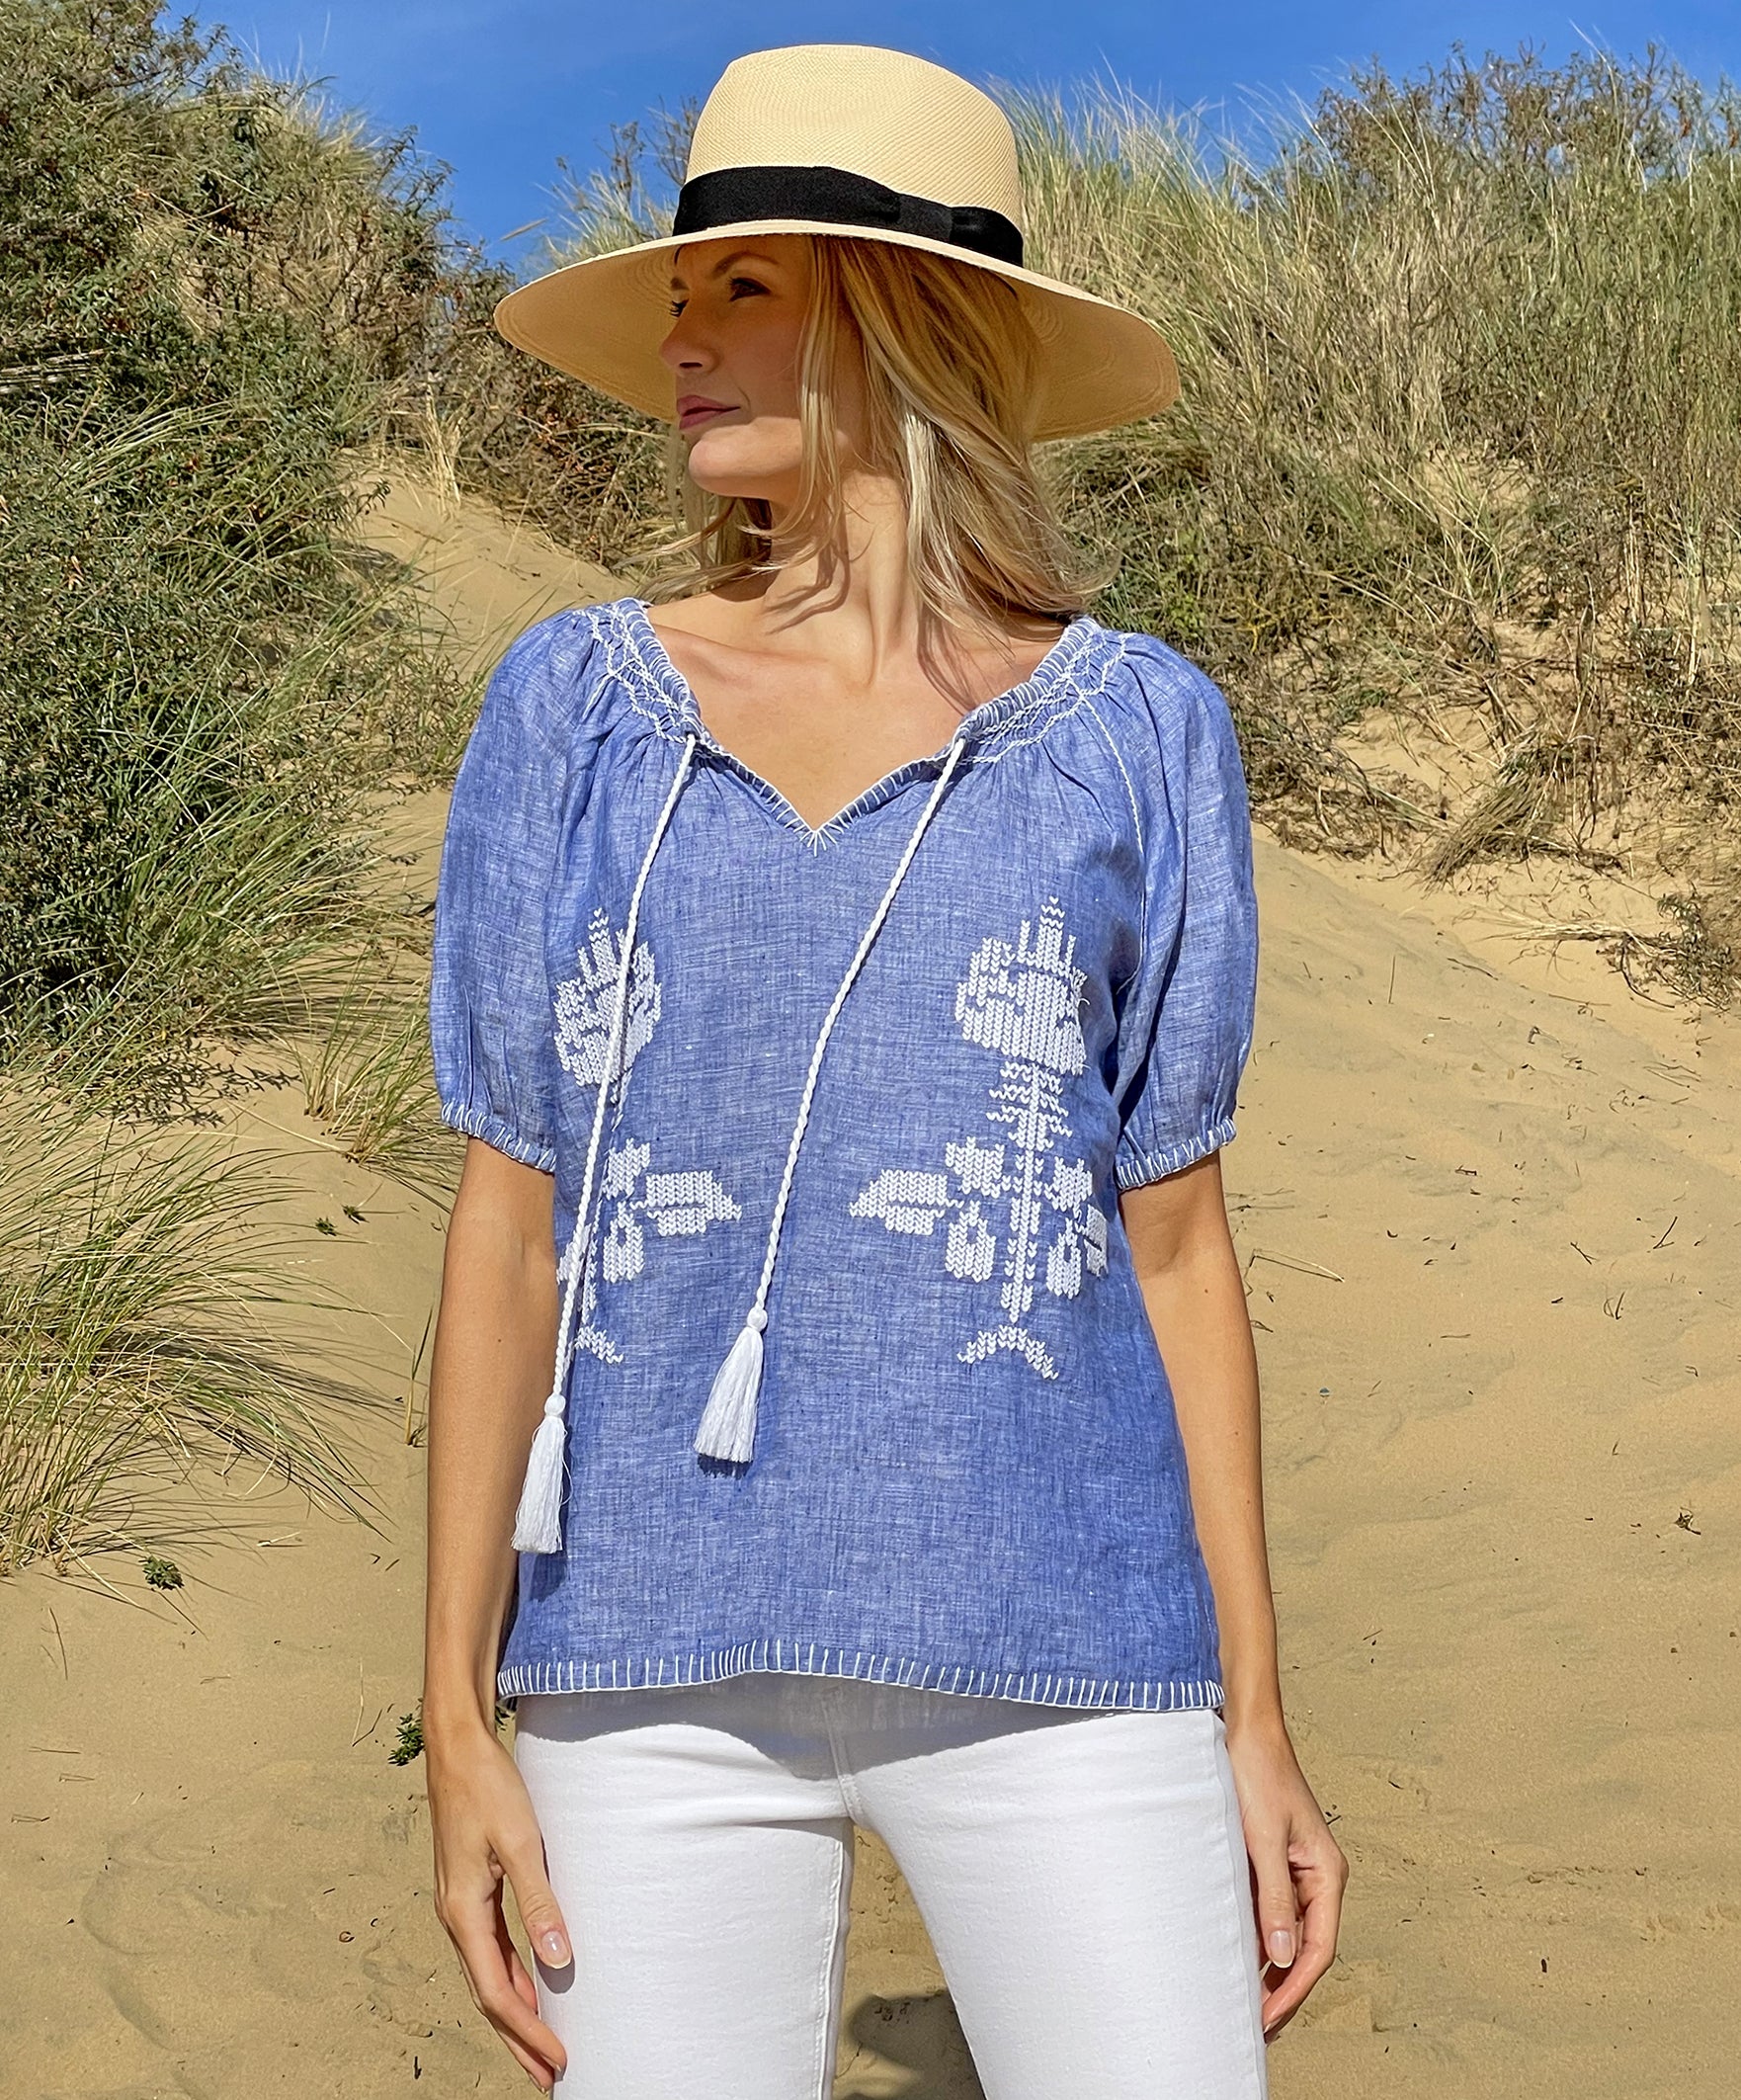 A model on a beach wearing the Rose and Rose Sorrento embroidered blue linen top and an Anthony Peto Panama hat.